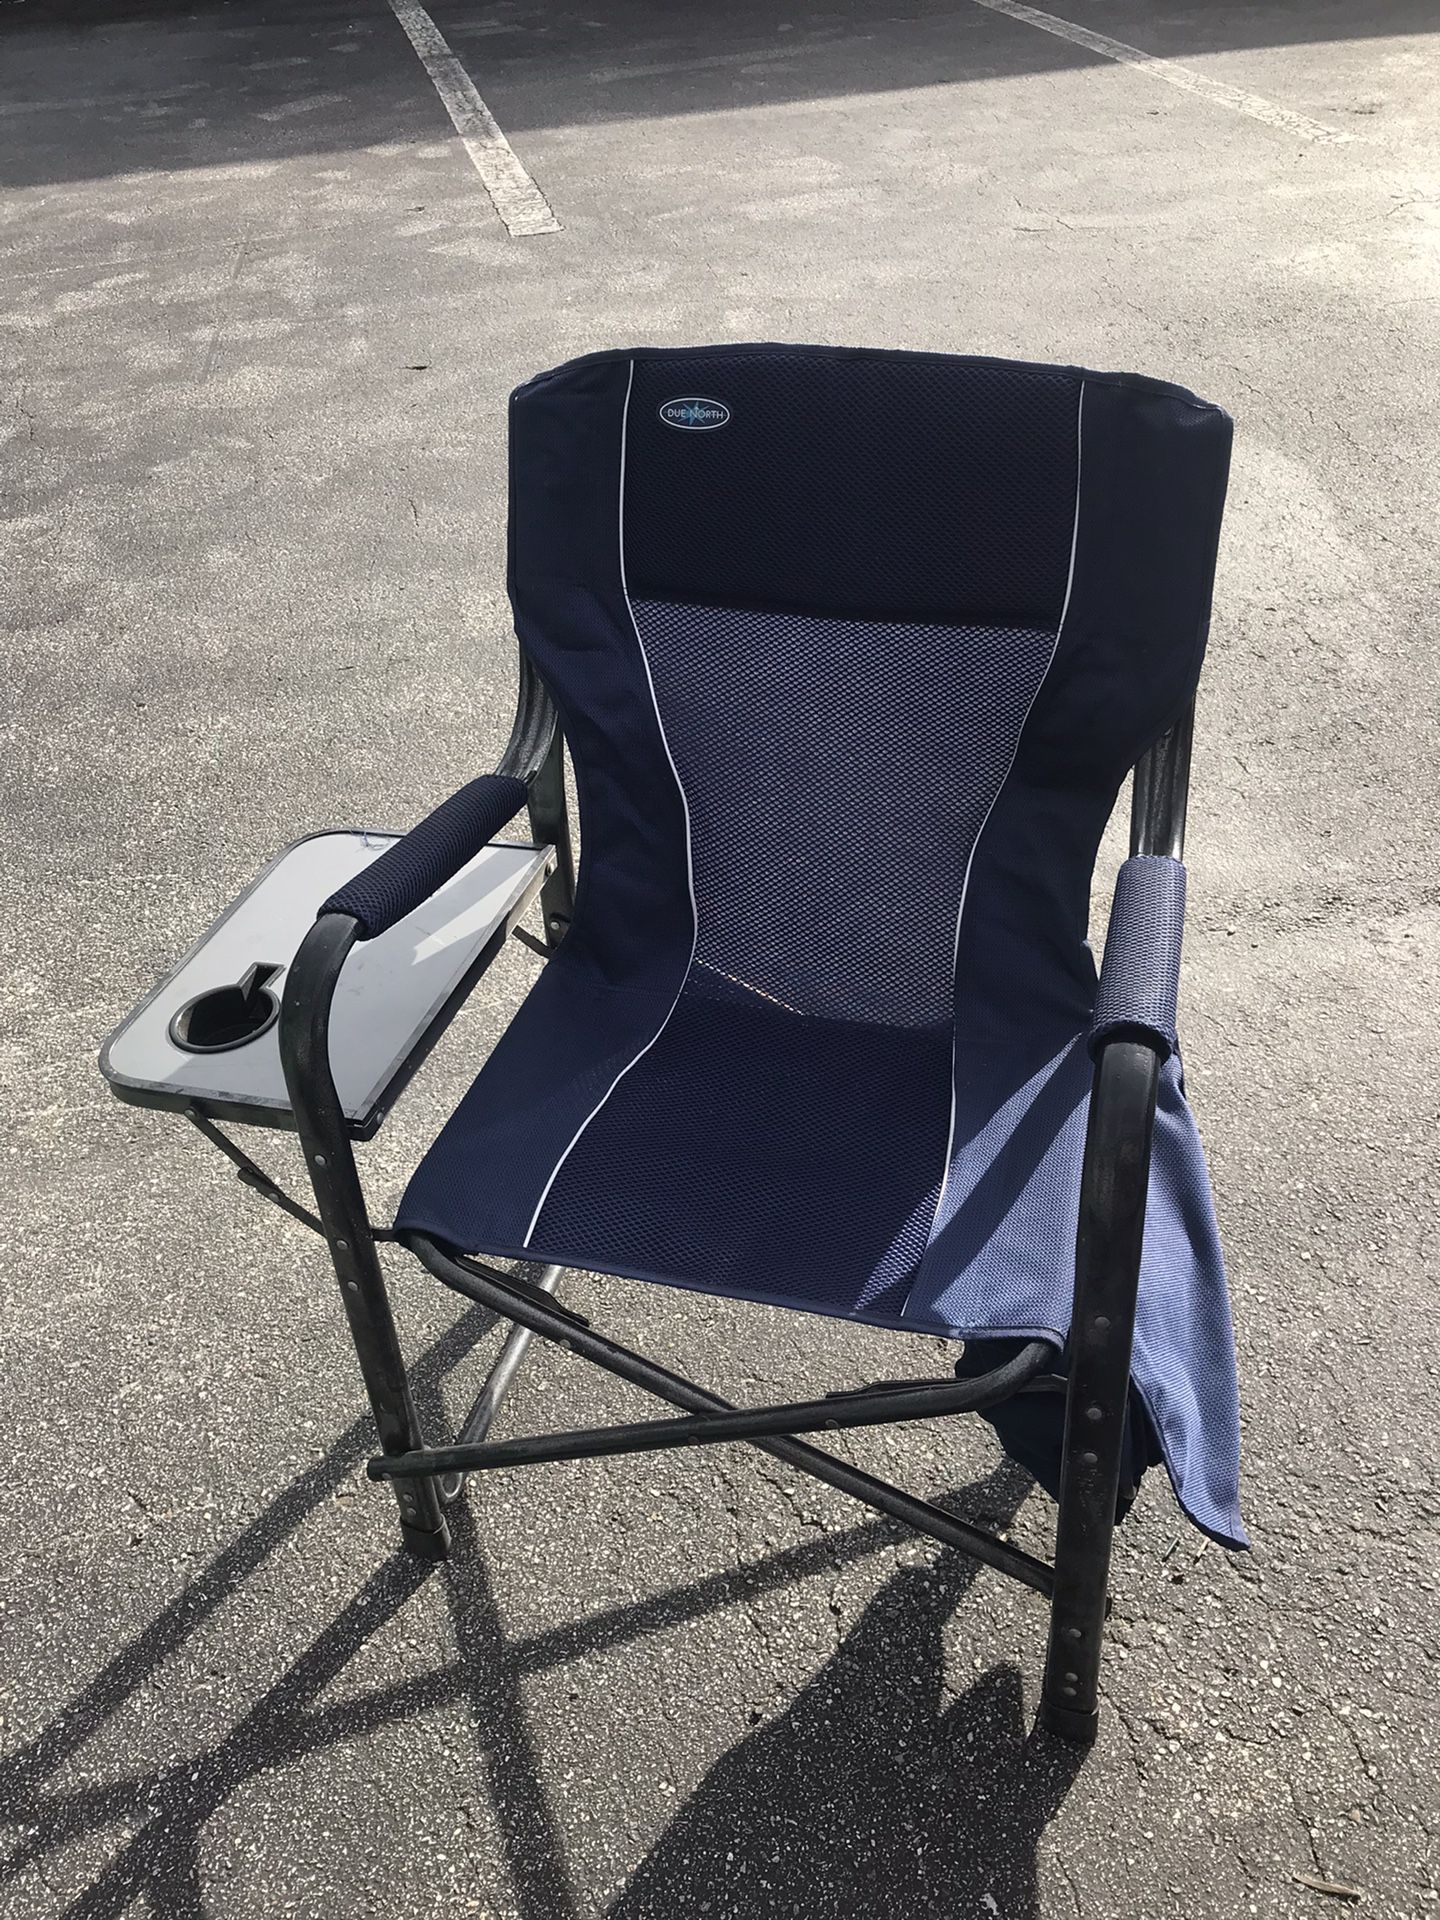 DUE NORTH Powder Coated Folding Camping Chairs, Heavy Duty with side table cup holder and cooler